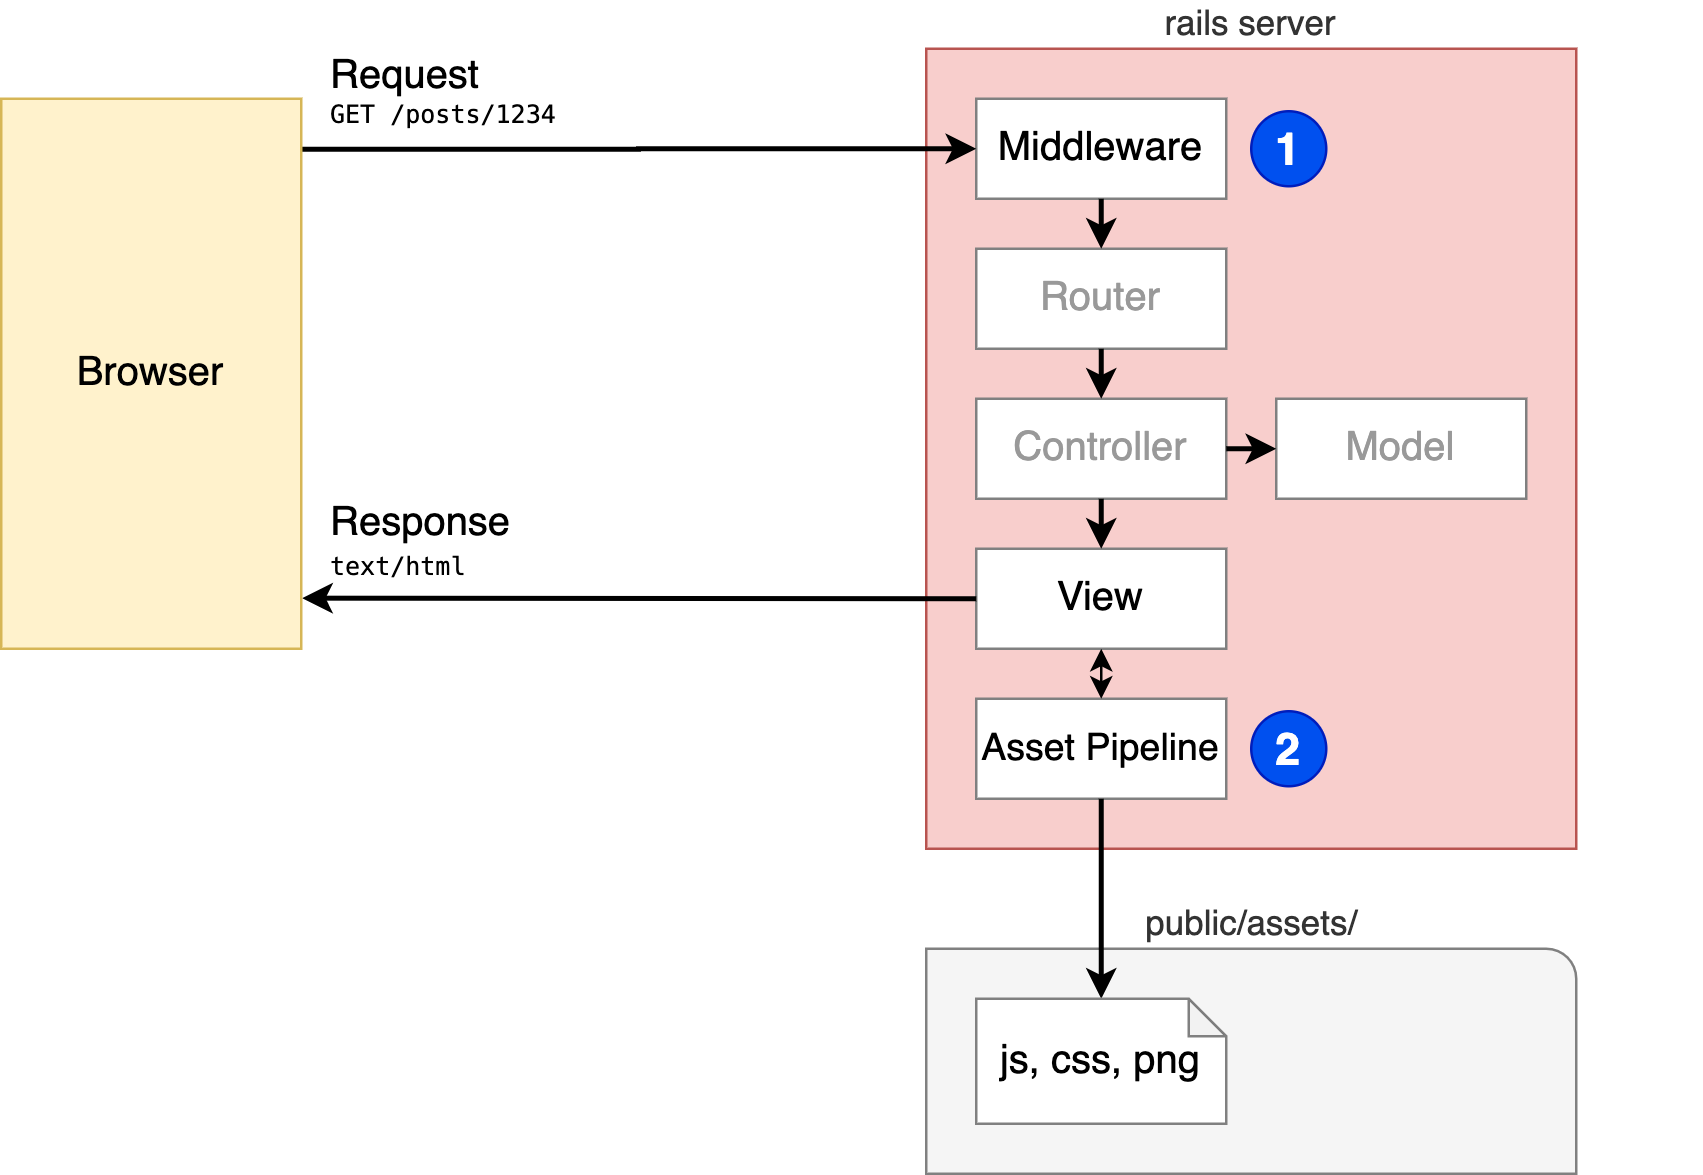 Rails request with the asset pipeline